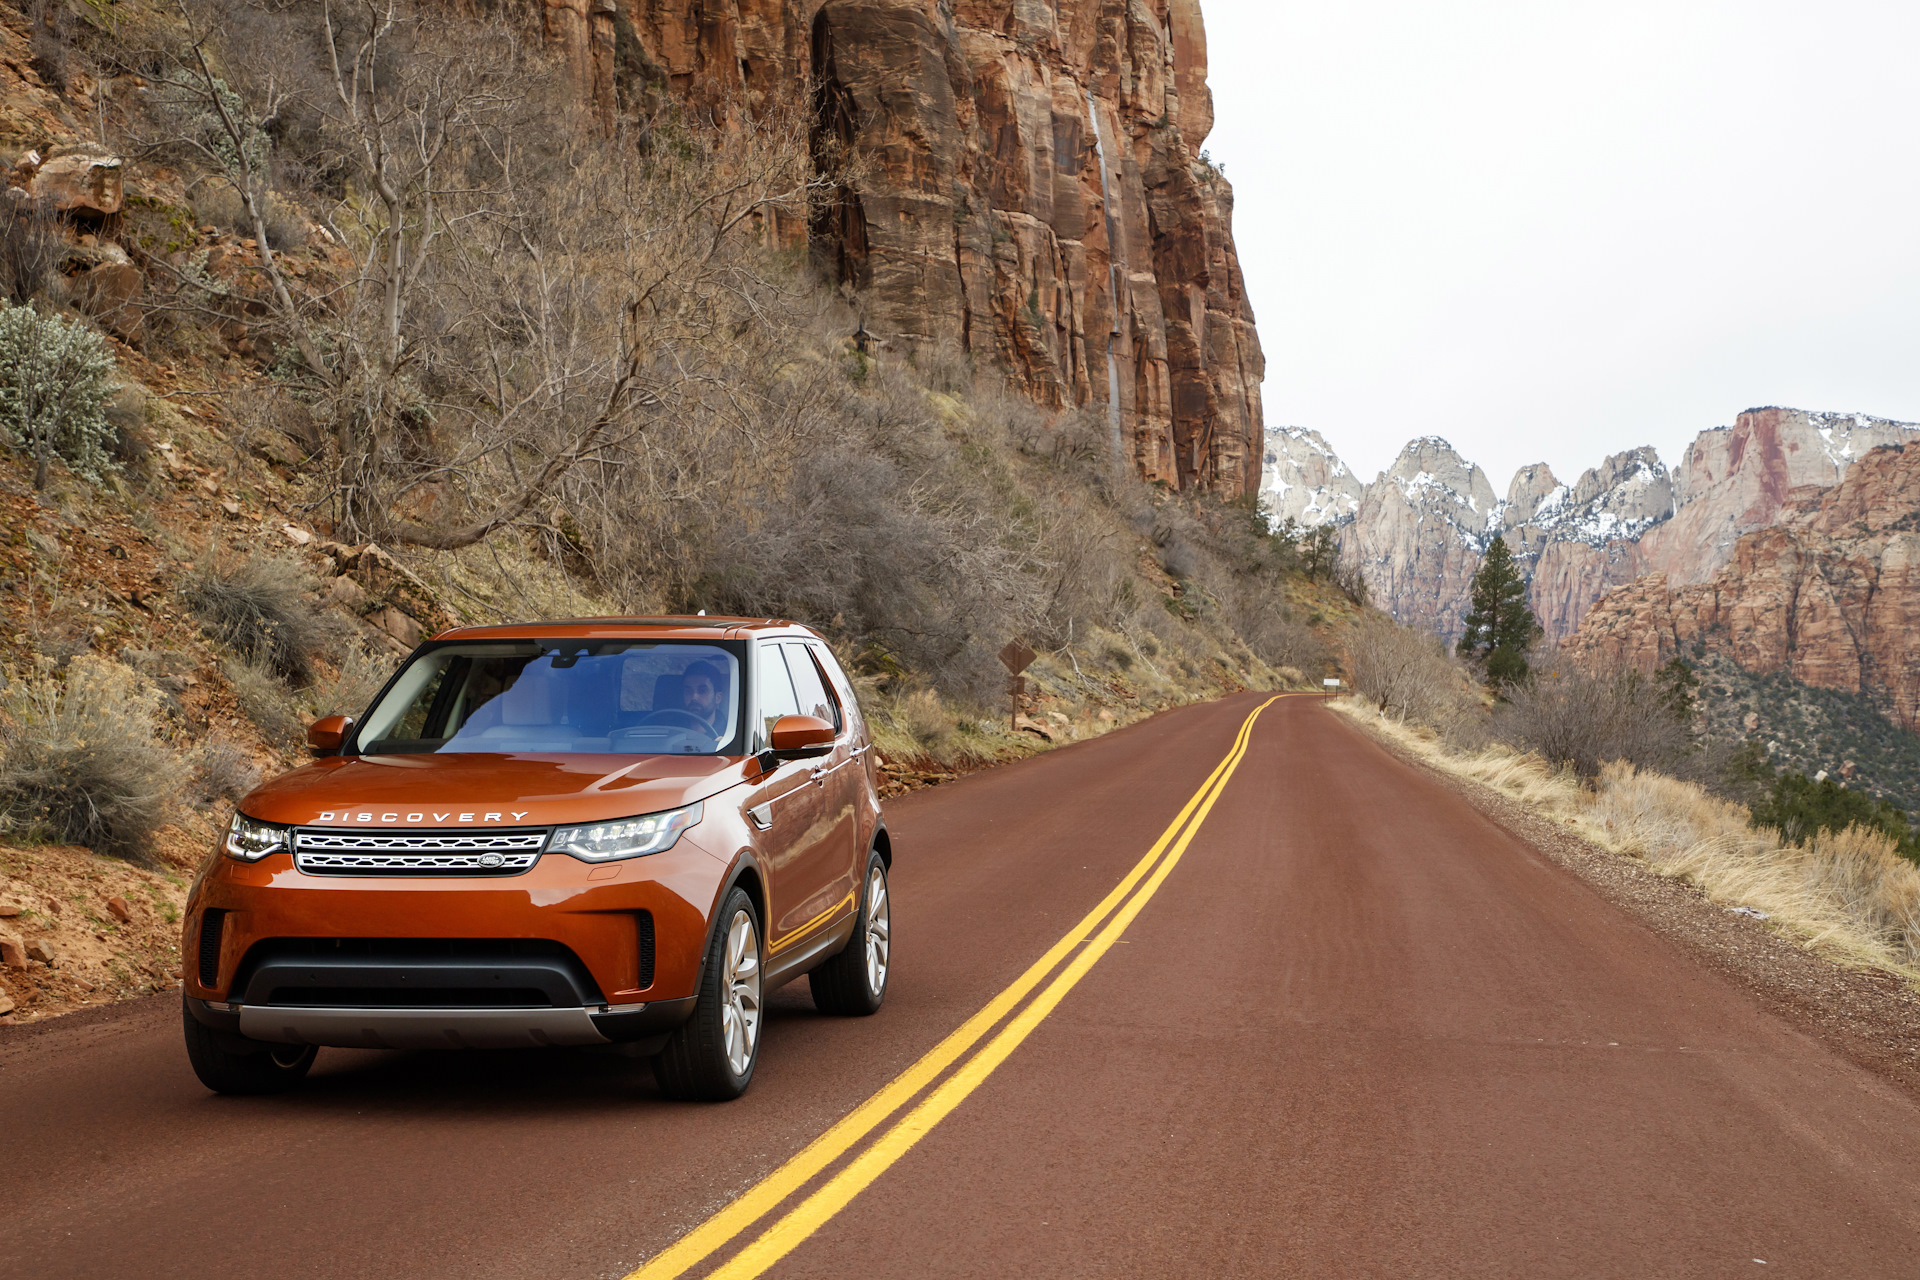 Ело дискавери. Land Rover Discovery 5. Land Rover Discovery 5 Namib Orange. Land Rover Discovery Namib Orange. Land Rover Discovery 5 HSE.